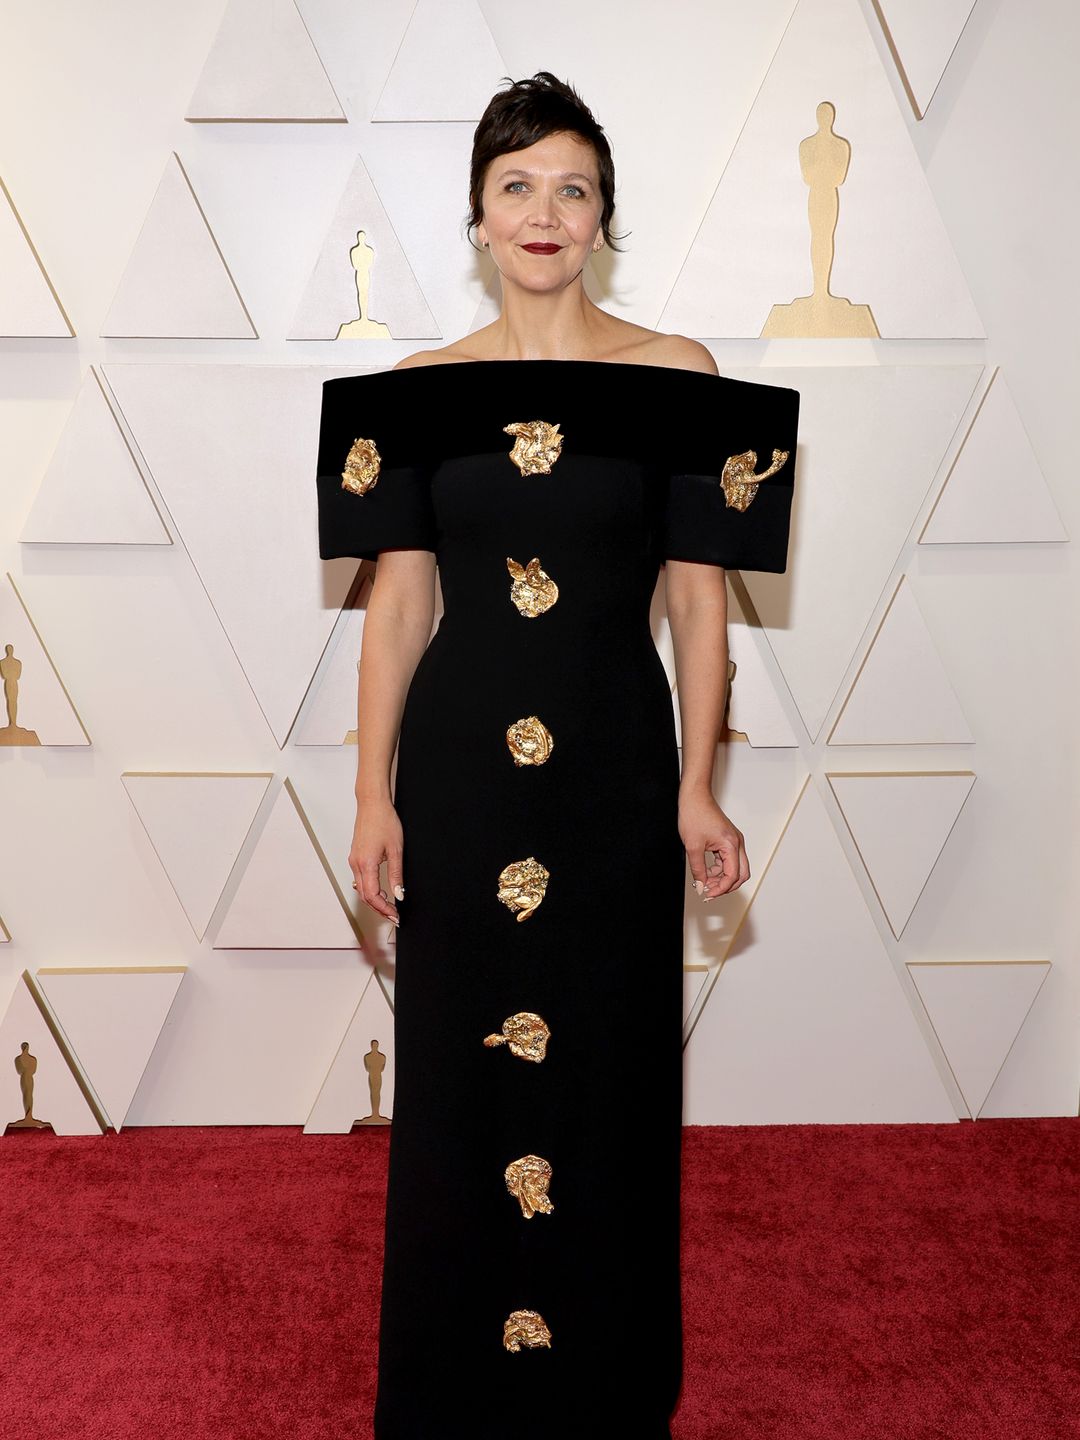 Maggie Gyllenhaal attends the 94th Annual Academy Awards in an off-the-shoulder black gown with gold accents